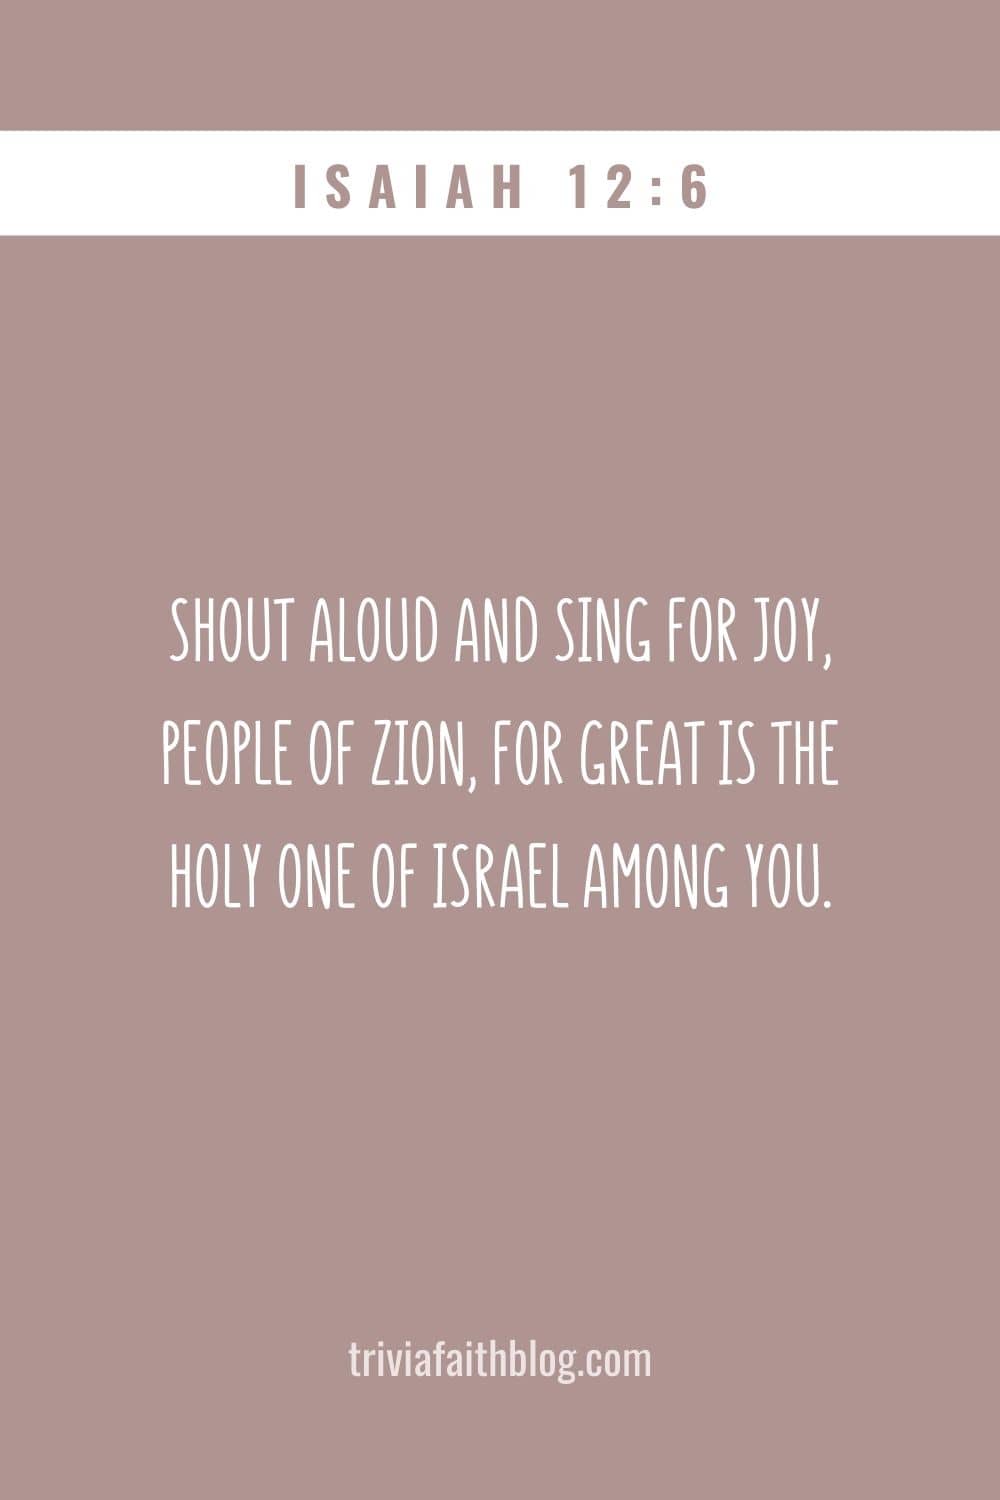 Shout aloud and sing for joy, people of Zion, for great is the Holy One of Israel among you